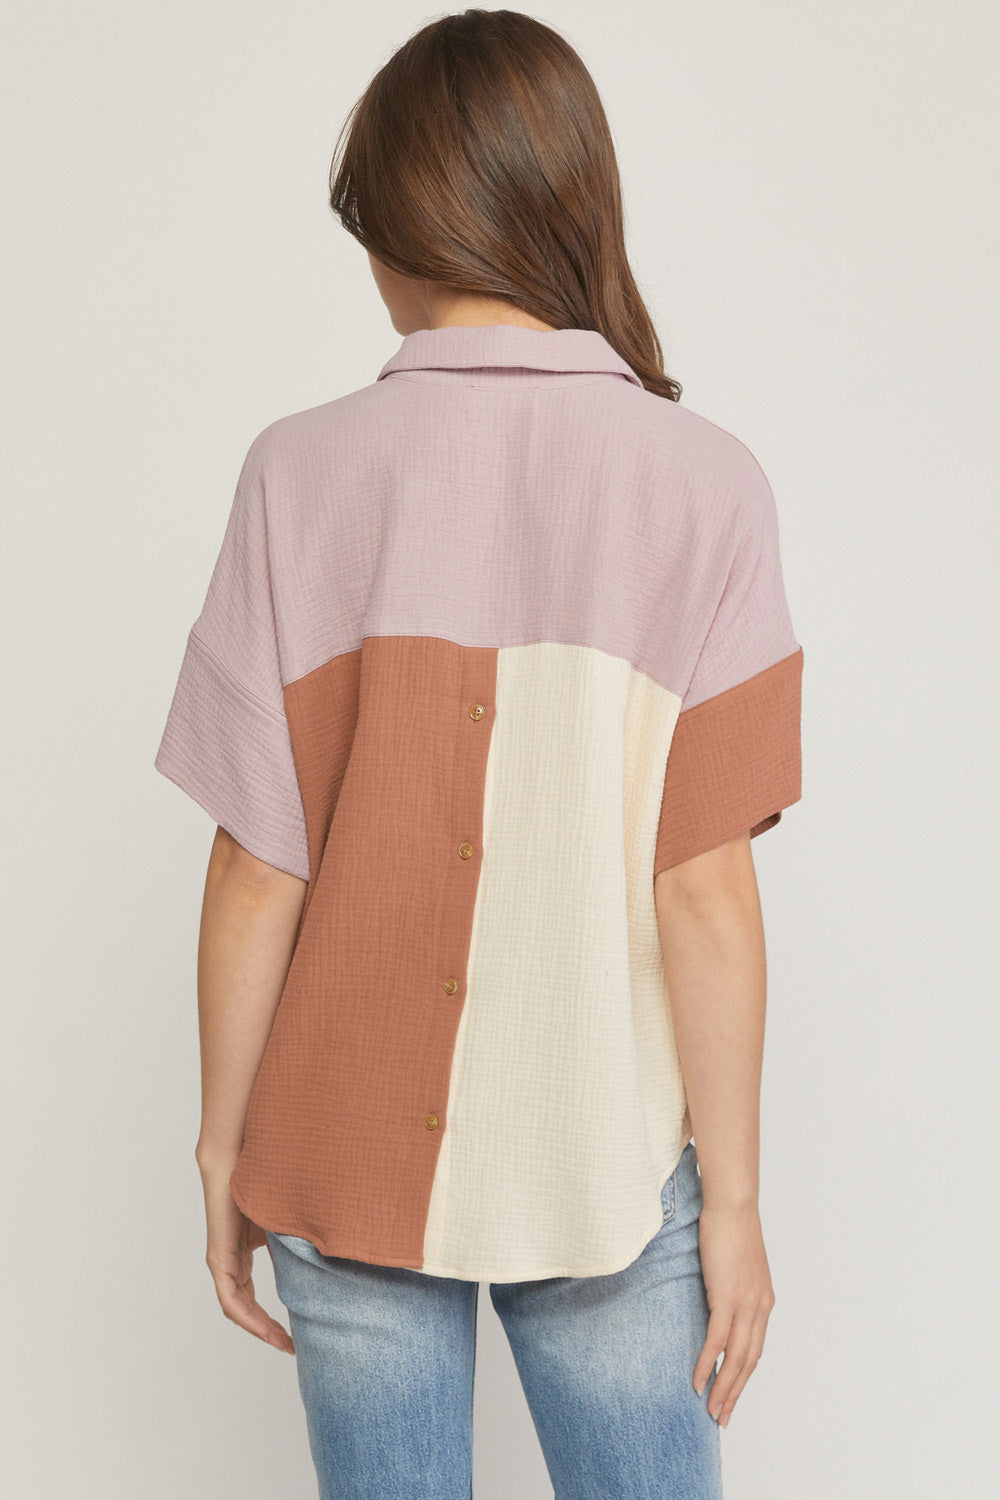 Entro Elaine Top - Clay Combo, color block, short sleeves, v-neck line, collared, pocket front, curvy